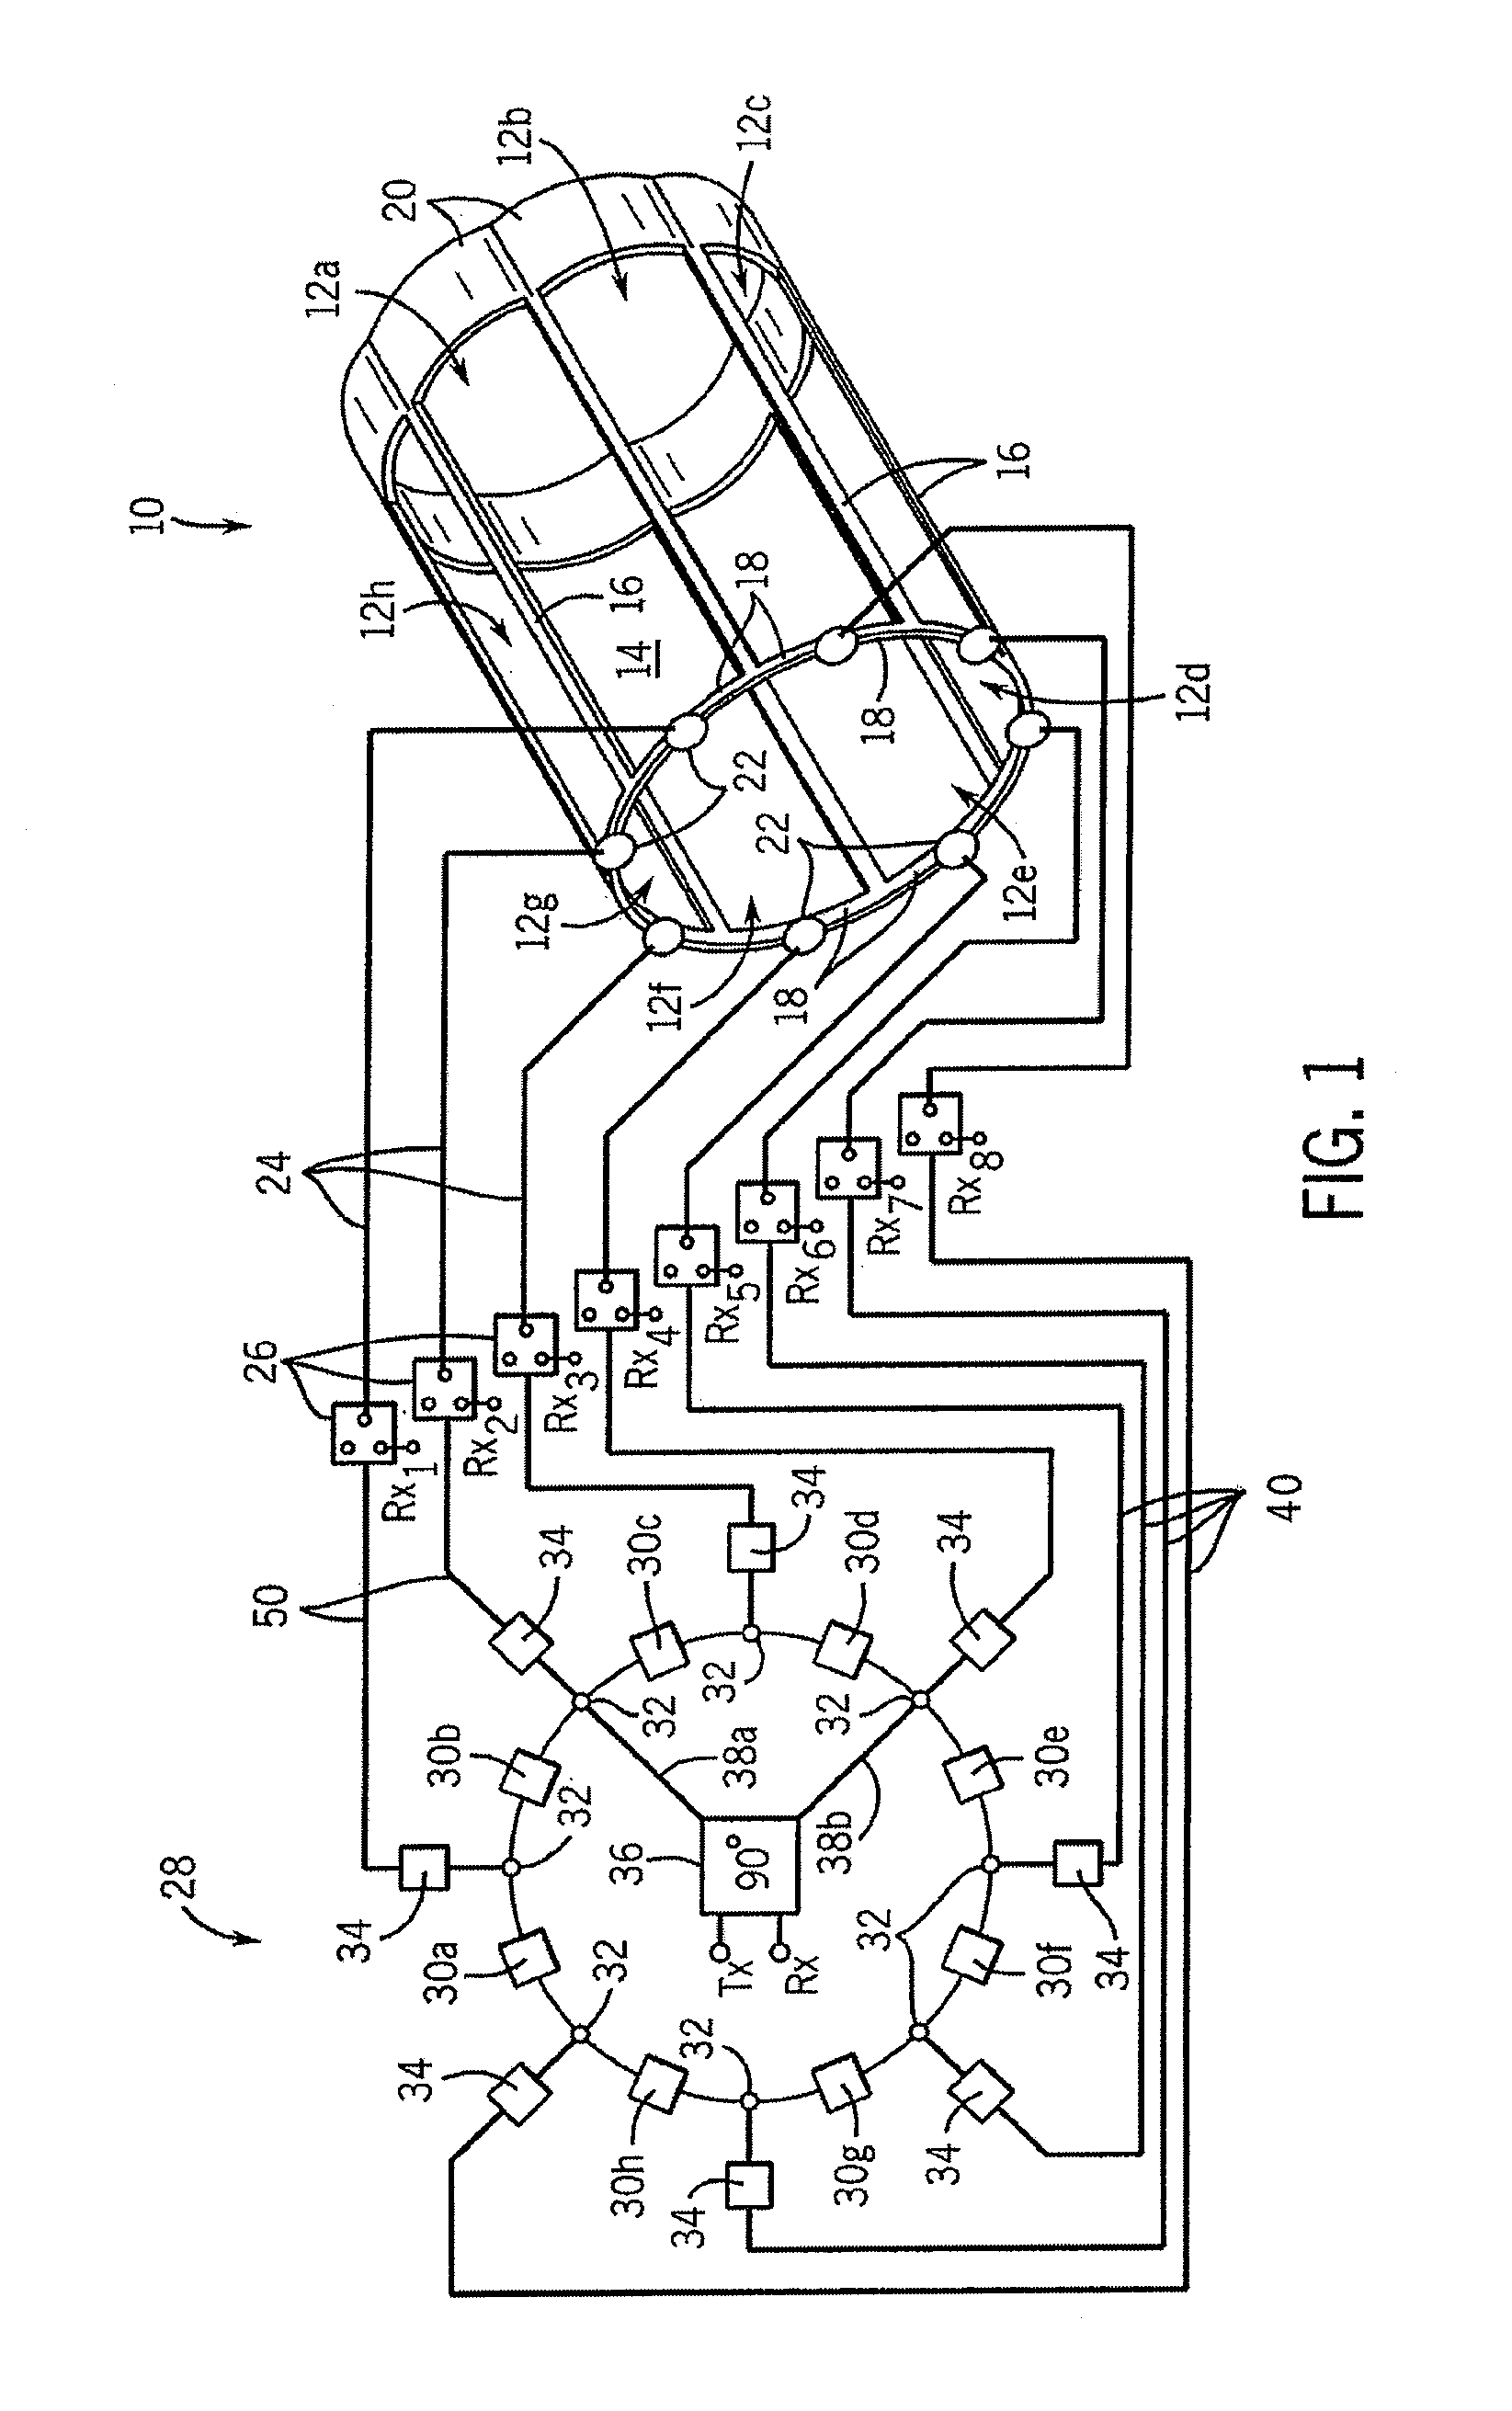 Phased array MRI coil with controllable coupled ring resonator